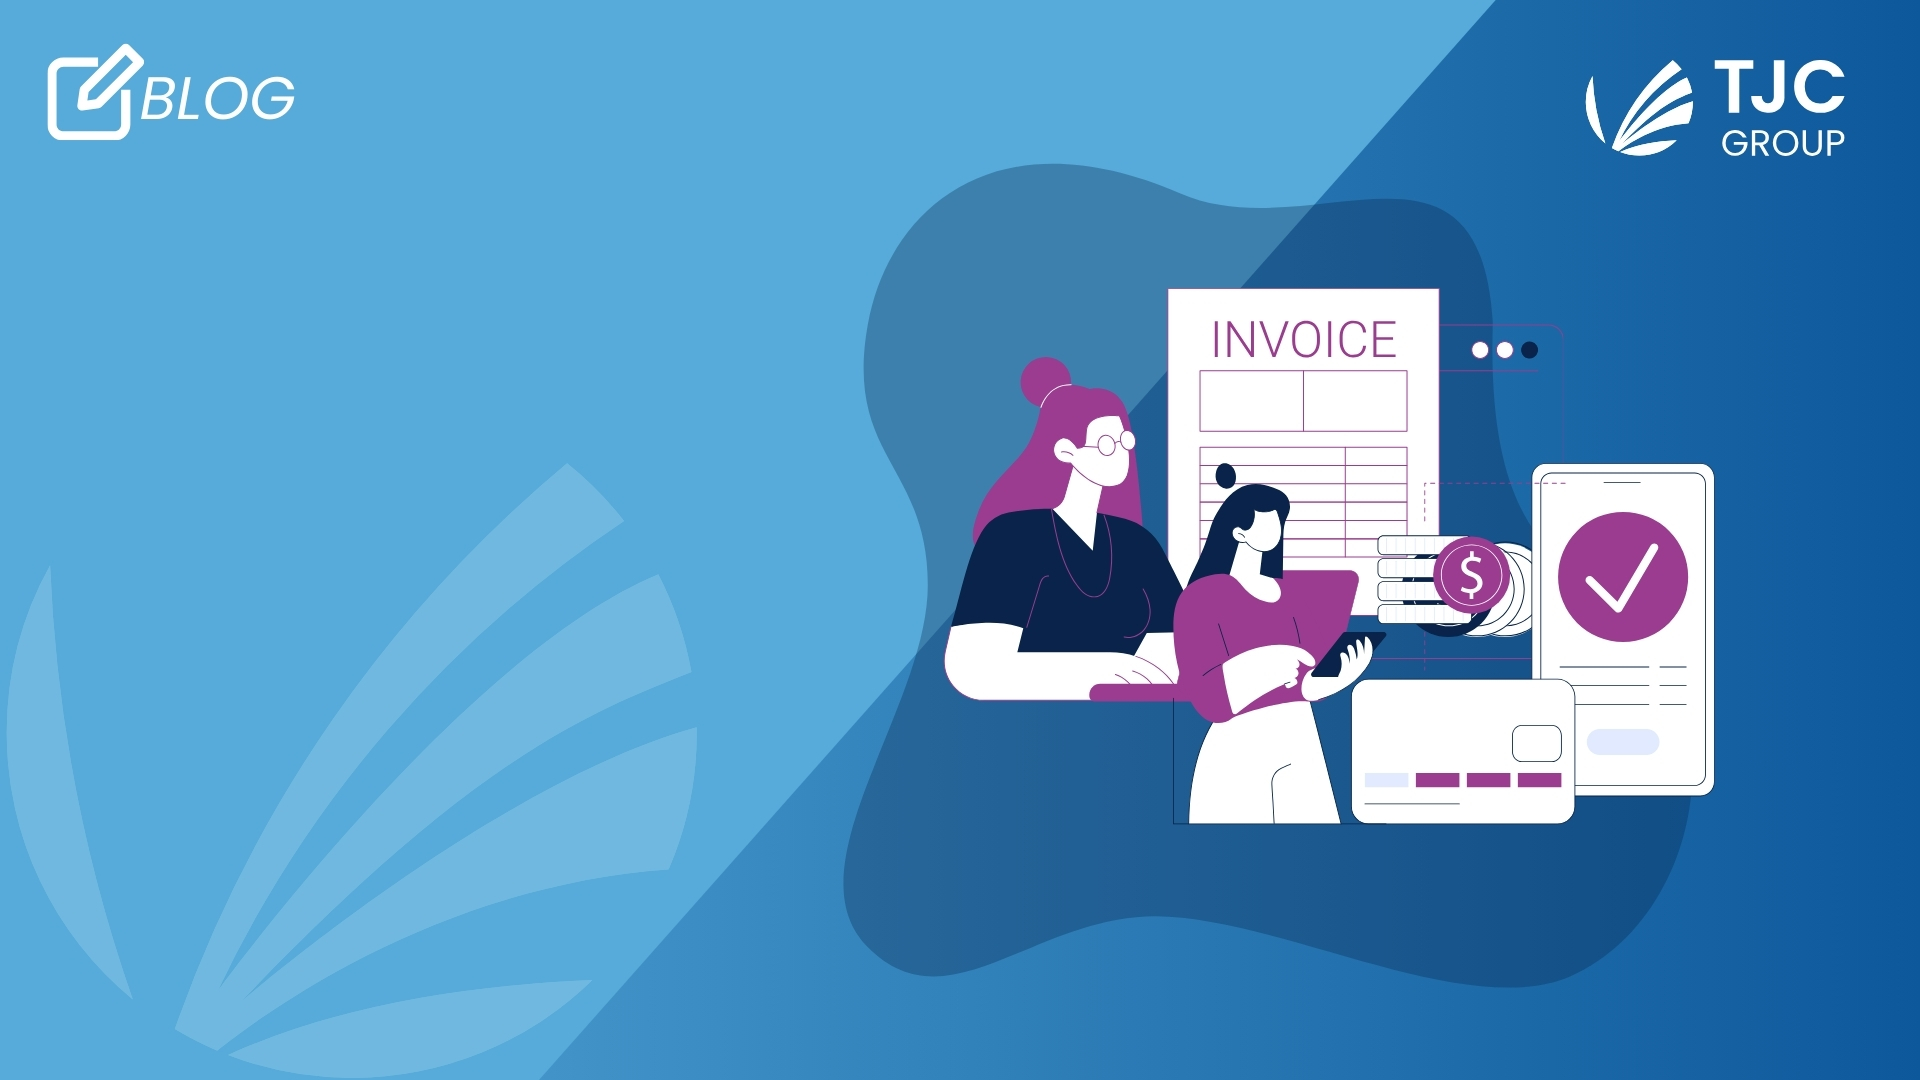 E-invoicing formats in different countries